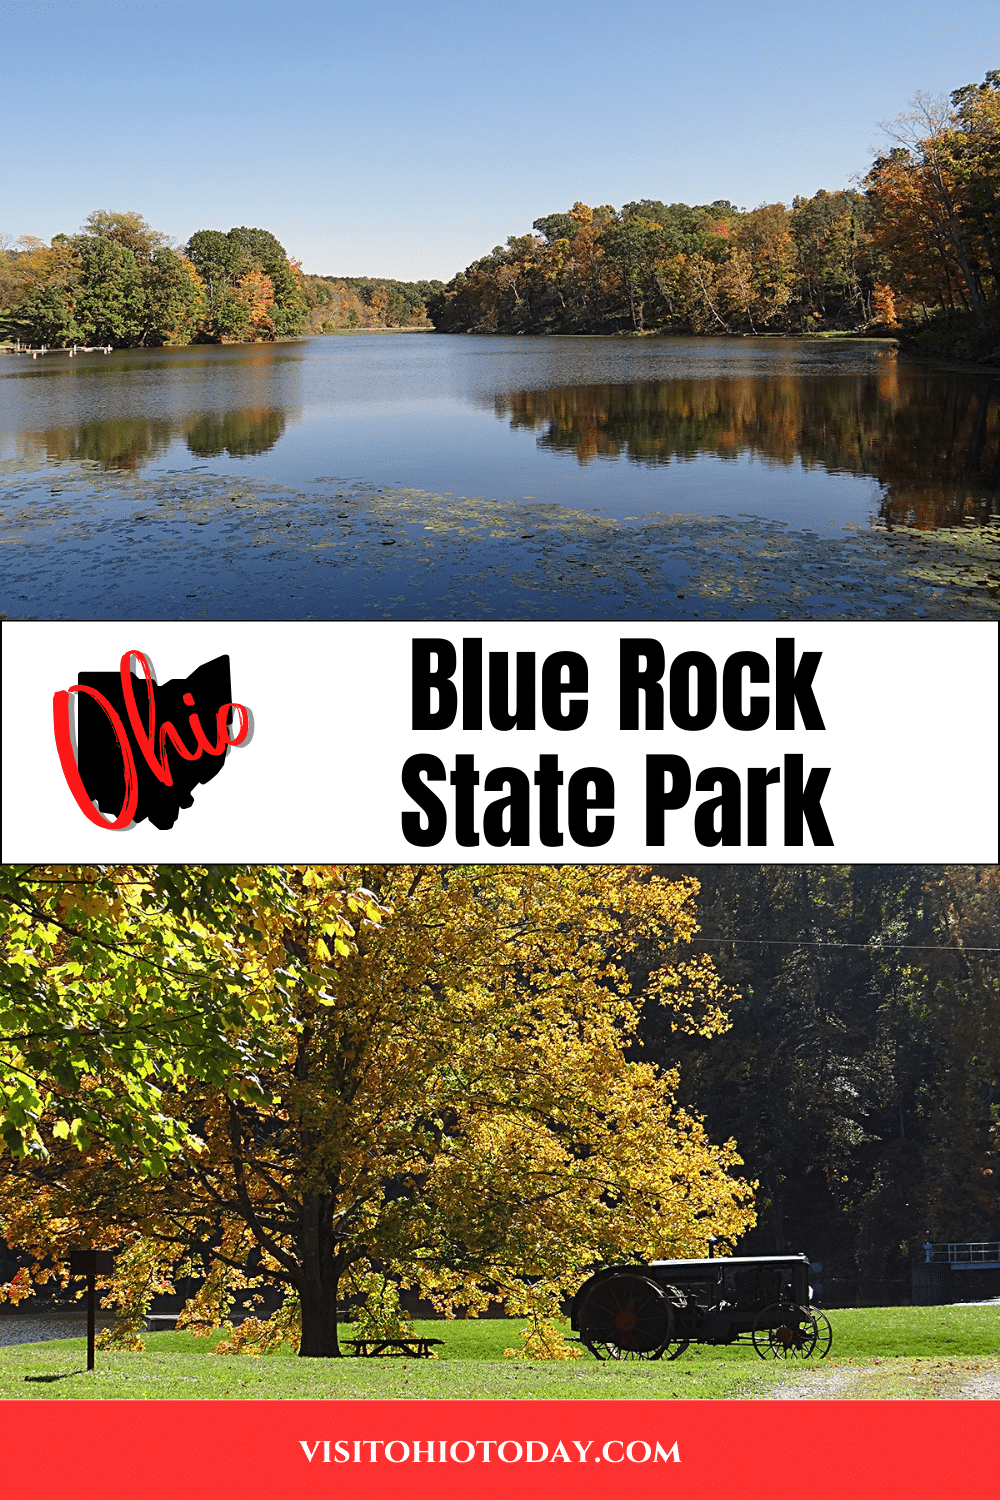 Blue Rock State Park is located in the southeast of Ohio. Enjoy the diverse flora and fauna with a backdrop of hills and forests at this 322-acre state park.